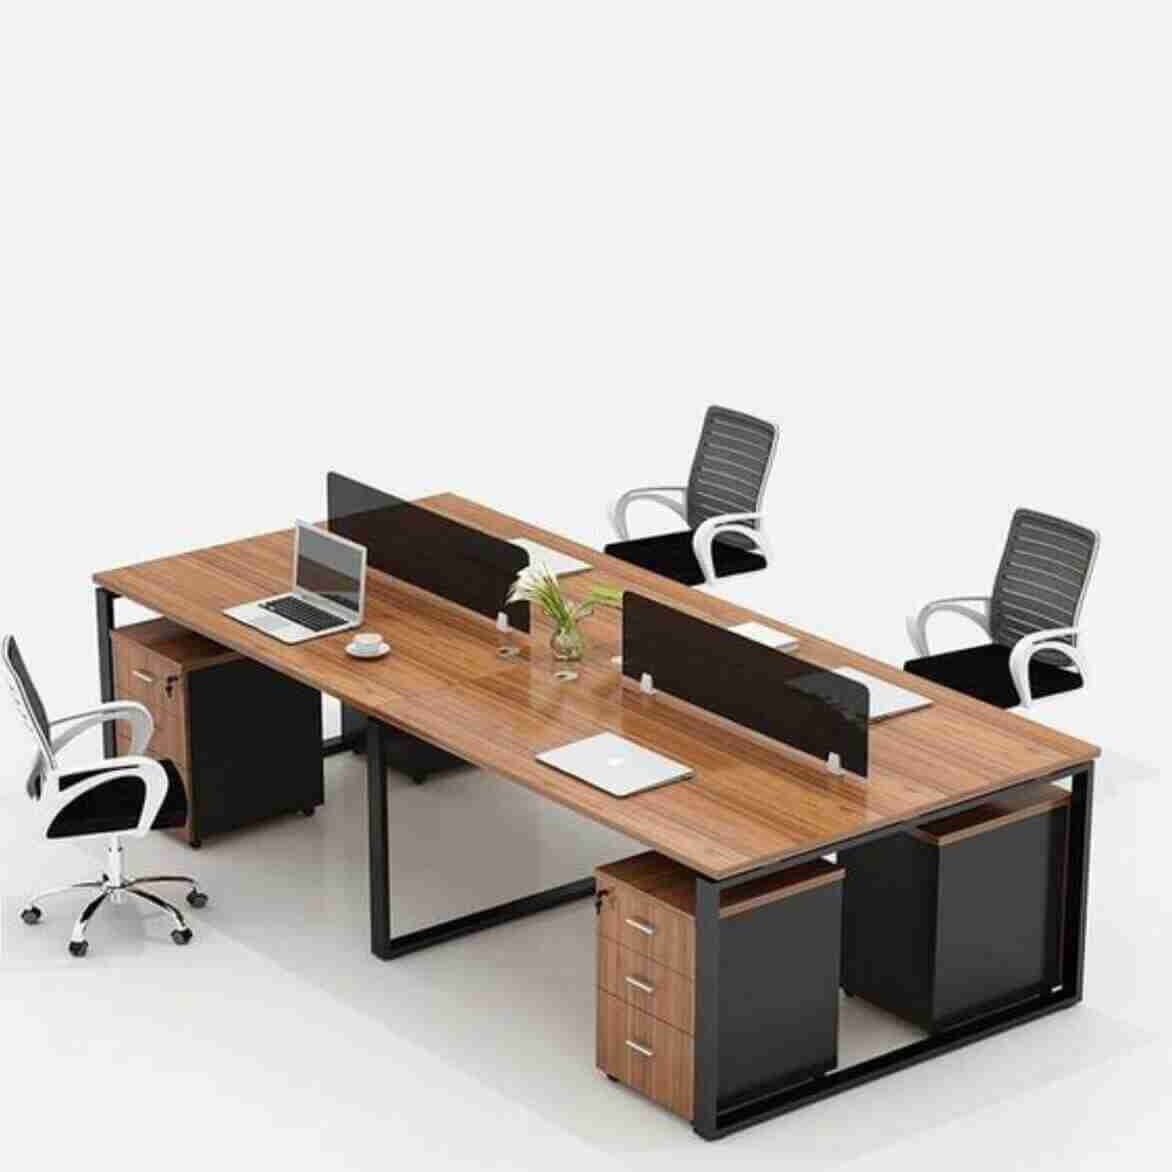 marketplace banner workstations | Buy the Best Office Furniture in Pakistan at the Best Prices | office furniture near me | furniture near me